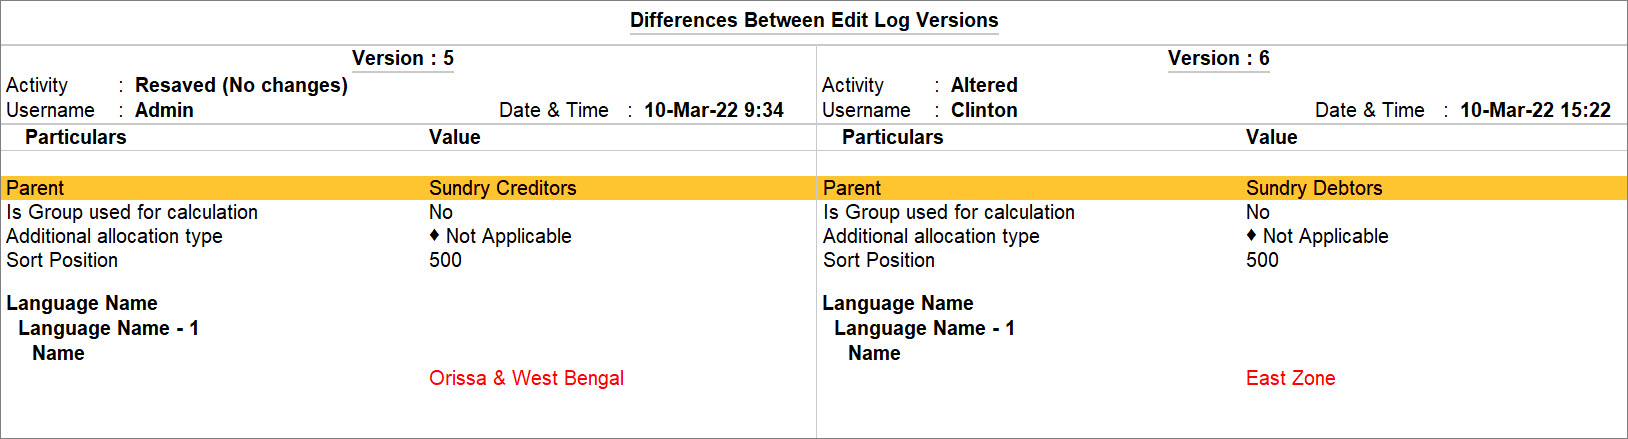 Differences Between Edit Log Versions for Groups in TallyPrime